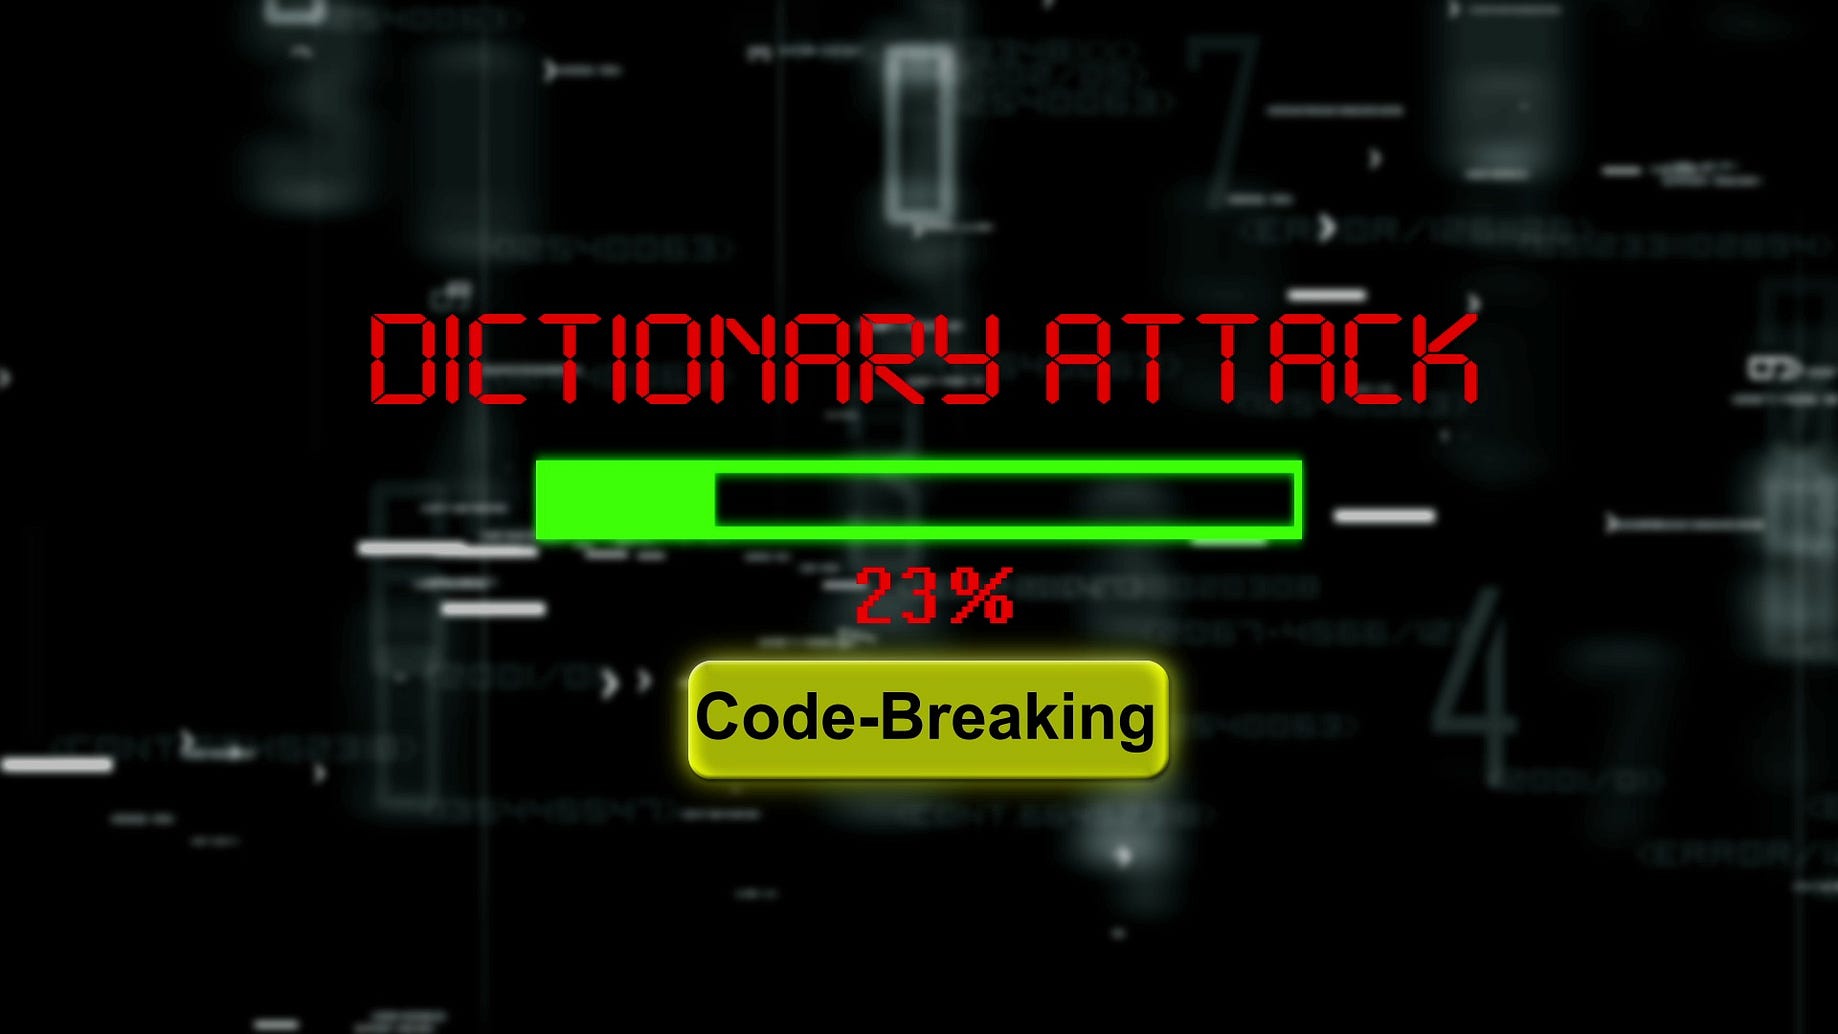 Image result for dictionary attack